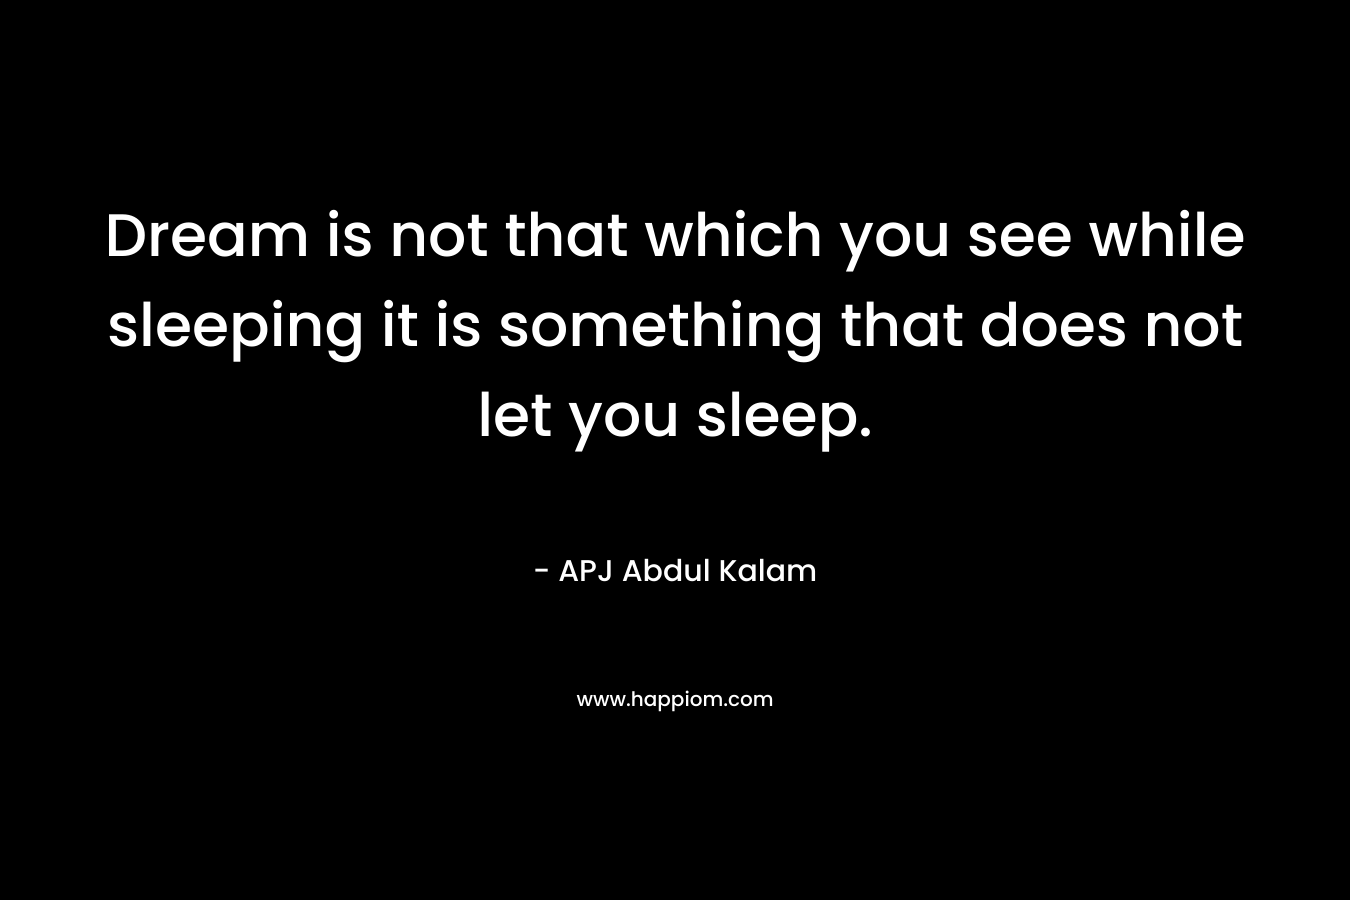 Dream is not that which you see while sleeping it is something that does not let you sleep.